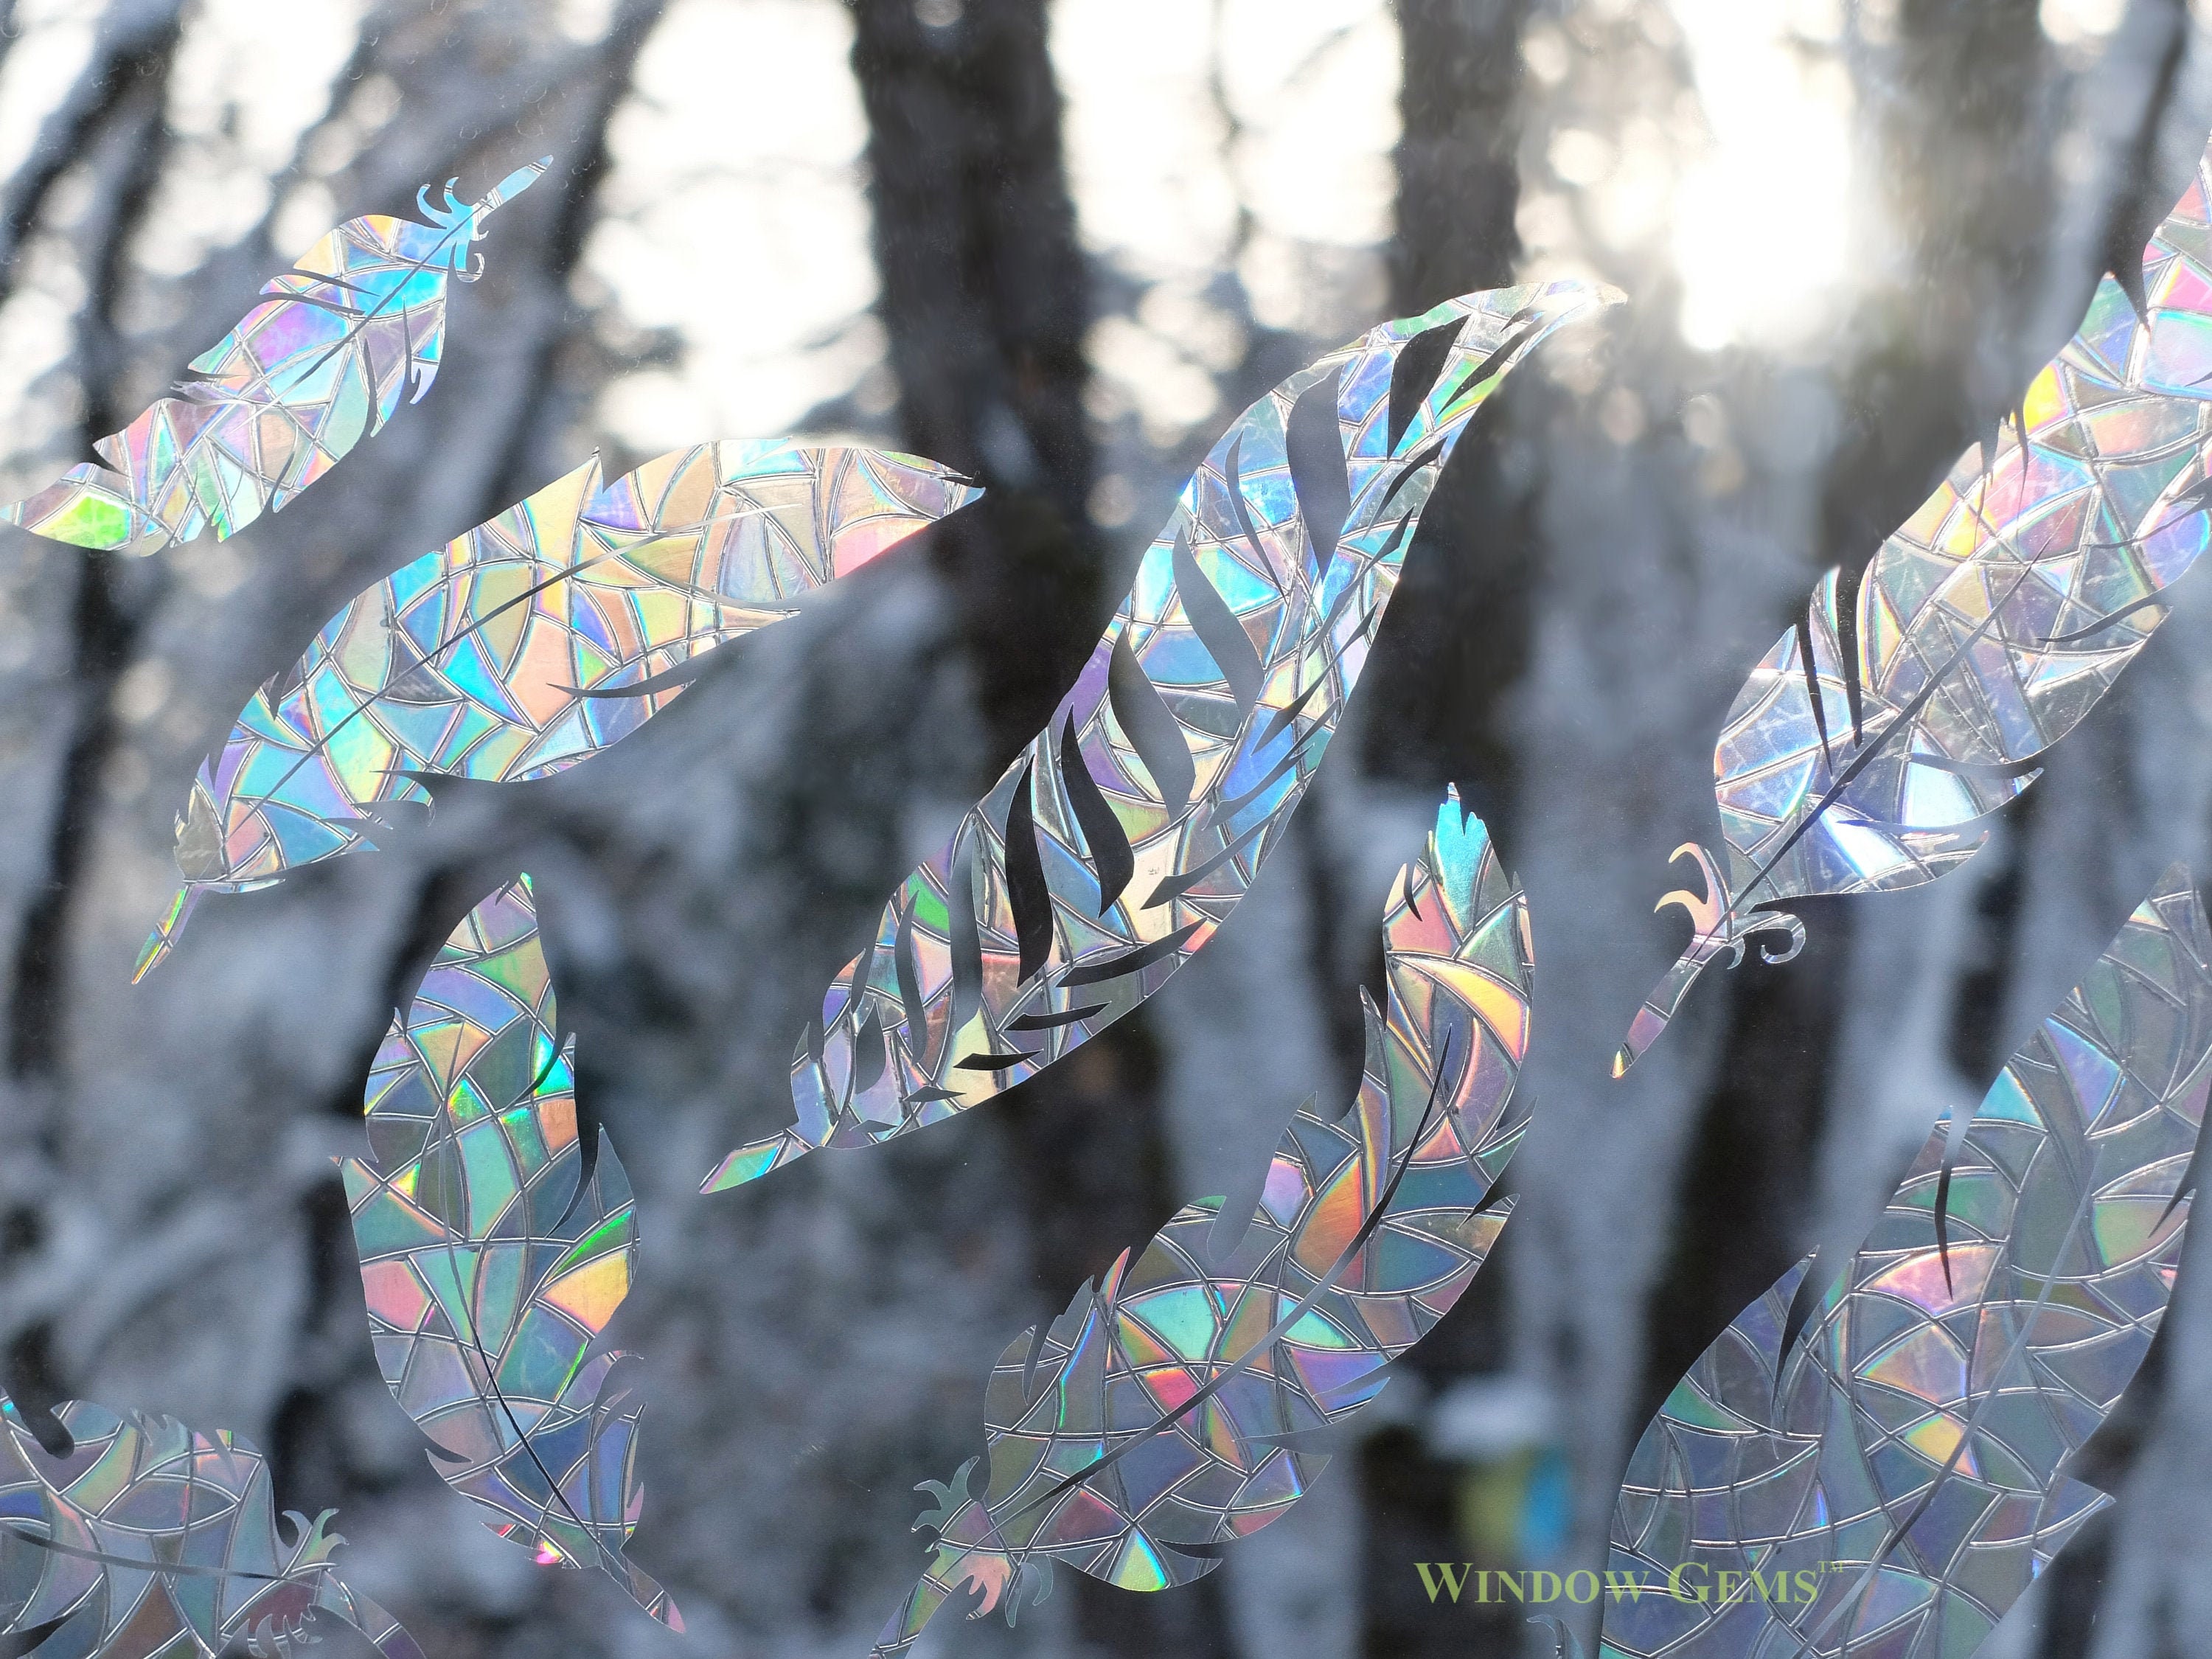 Rainbow Prism Feathers Decals Static Window Clings Alert - Etsy